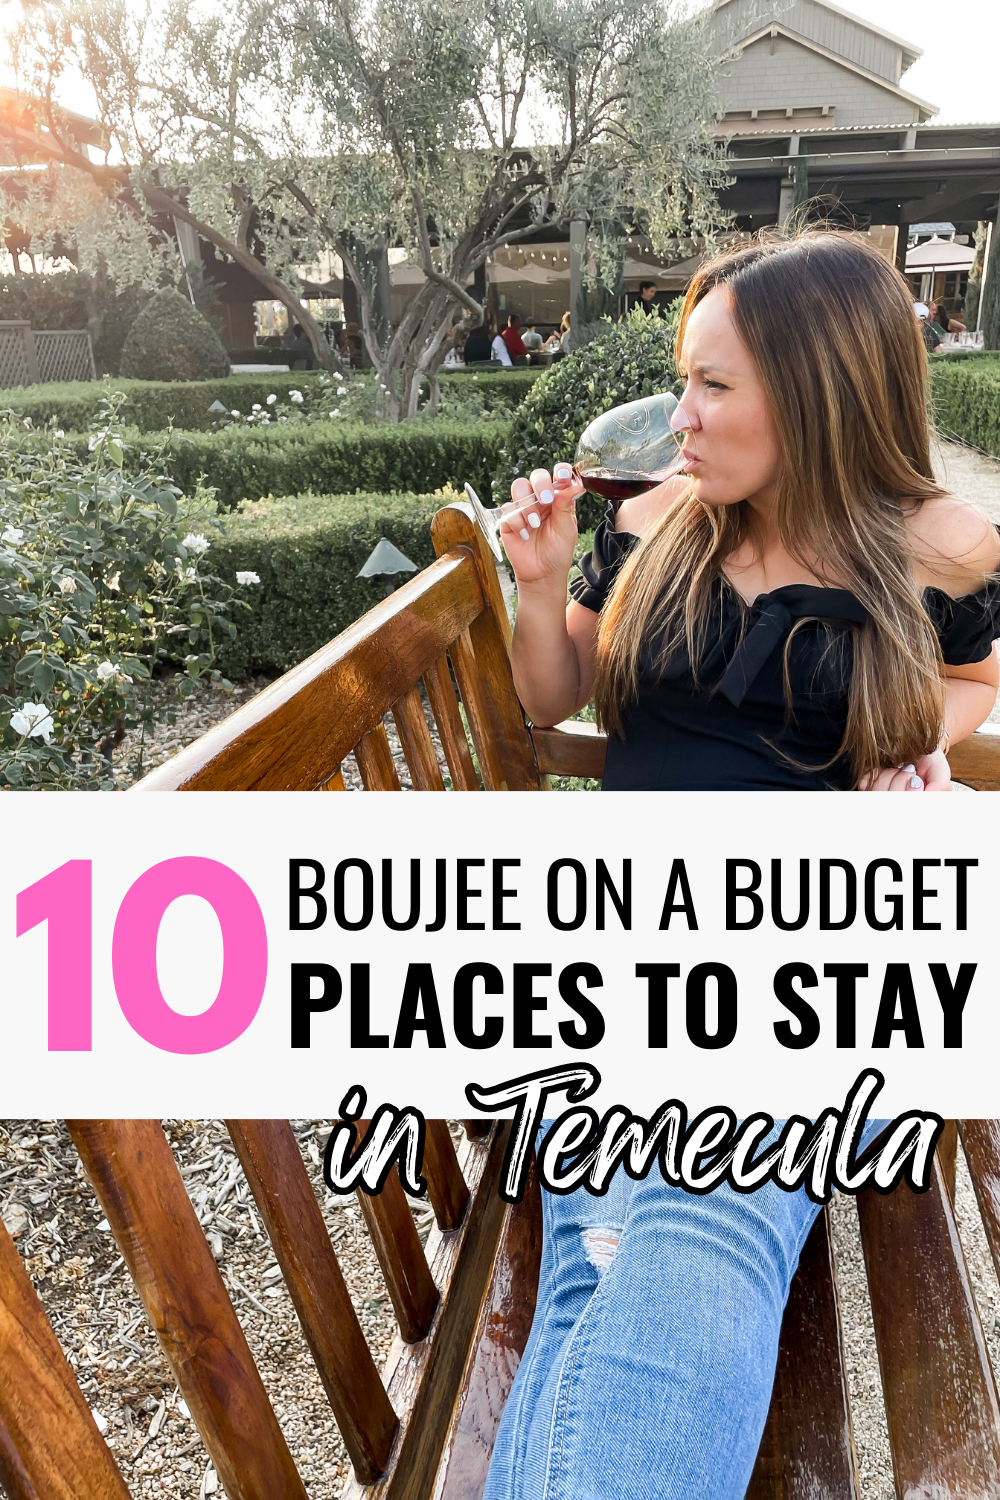 10 Boujee on a Budget Places to Stay in Temecula with a girl sipping wine at a vineyard